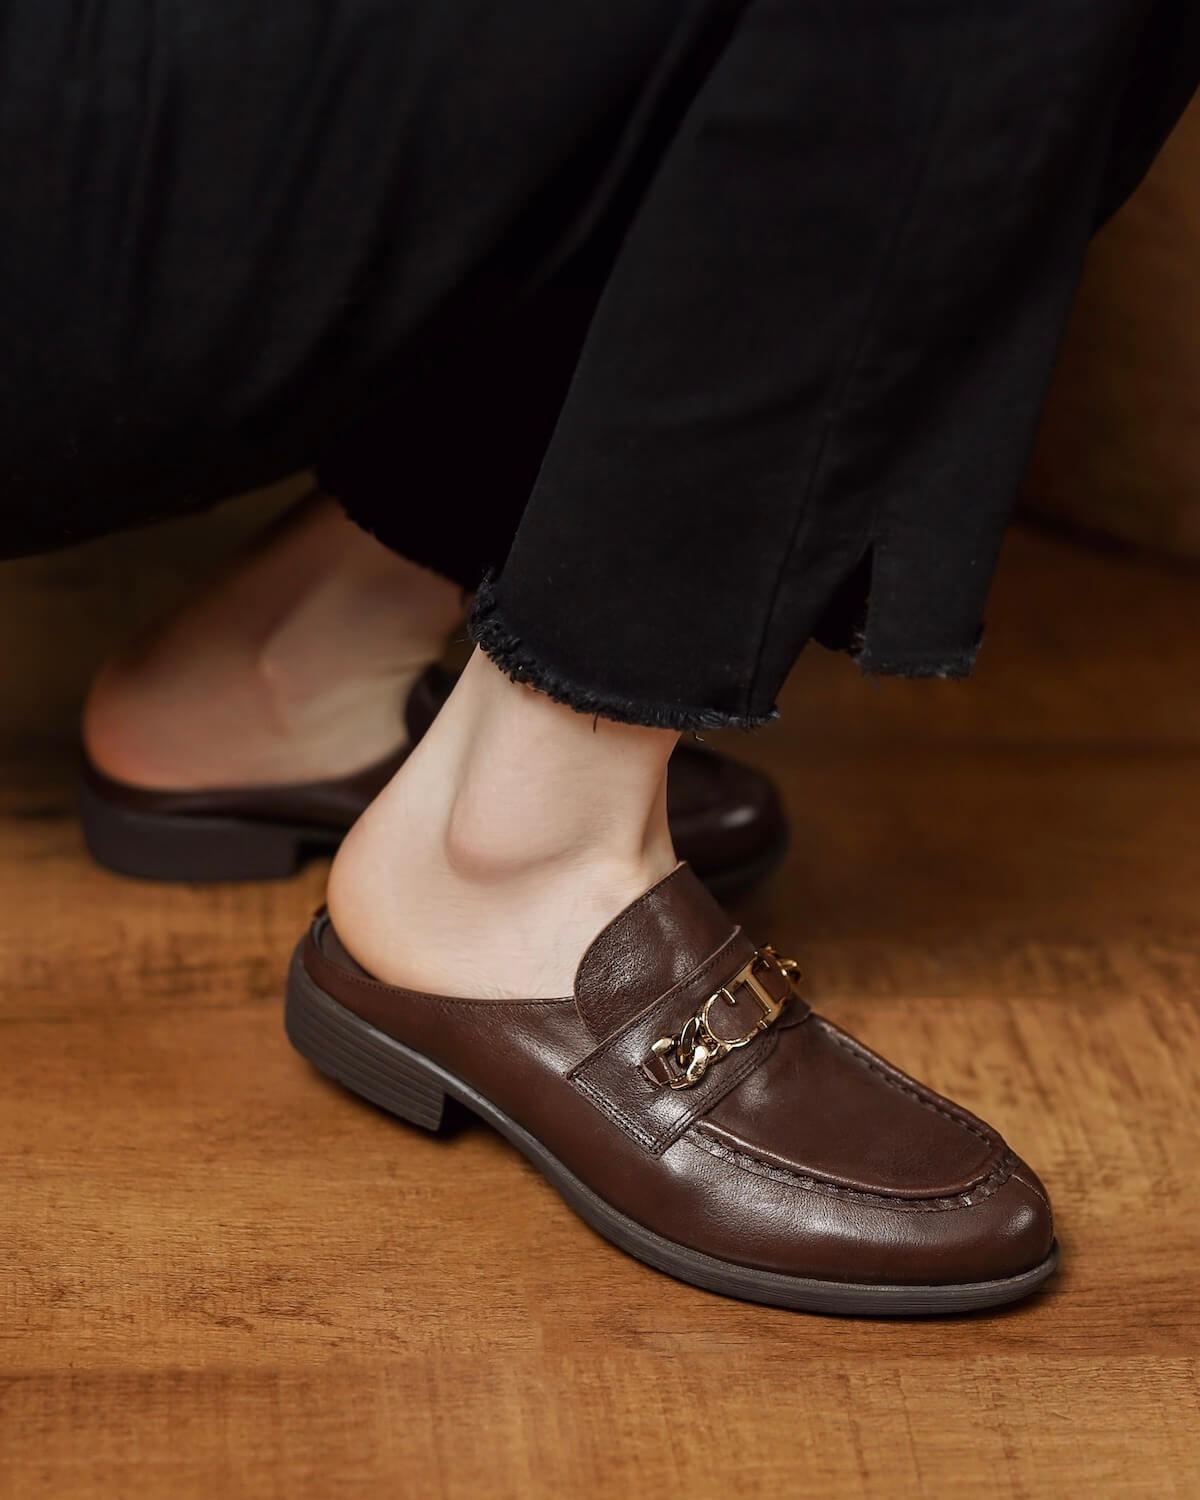 katni-mule-loafers-brown-leather-model